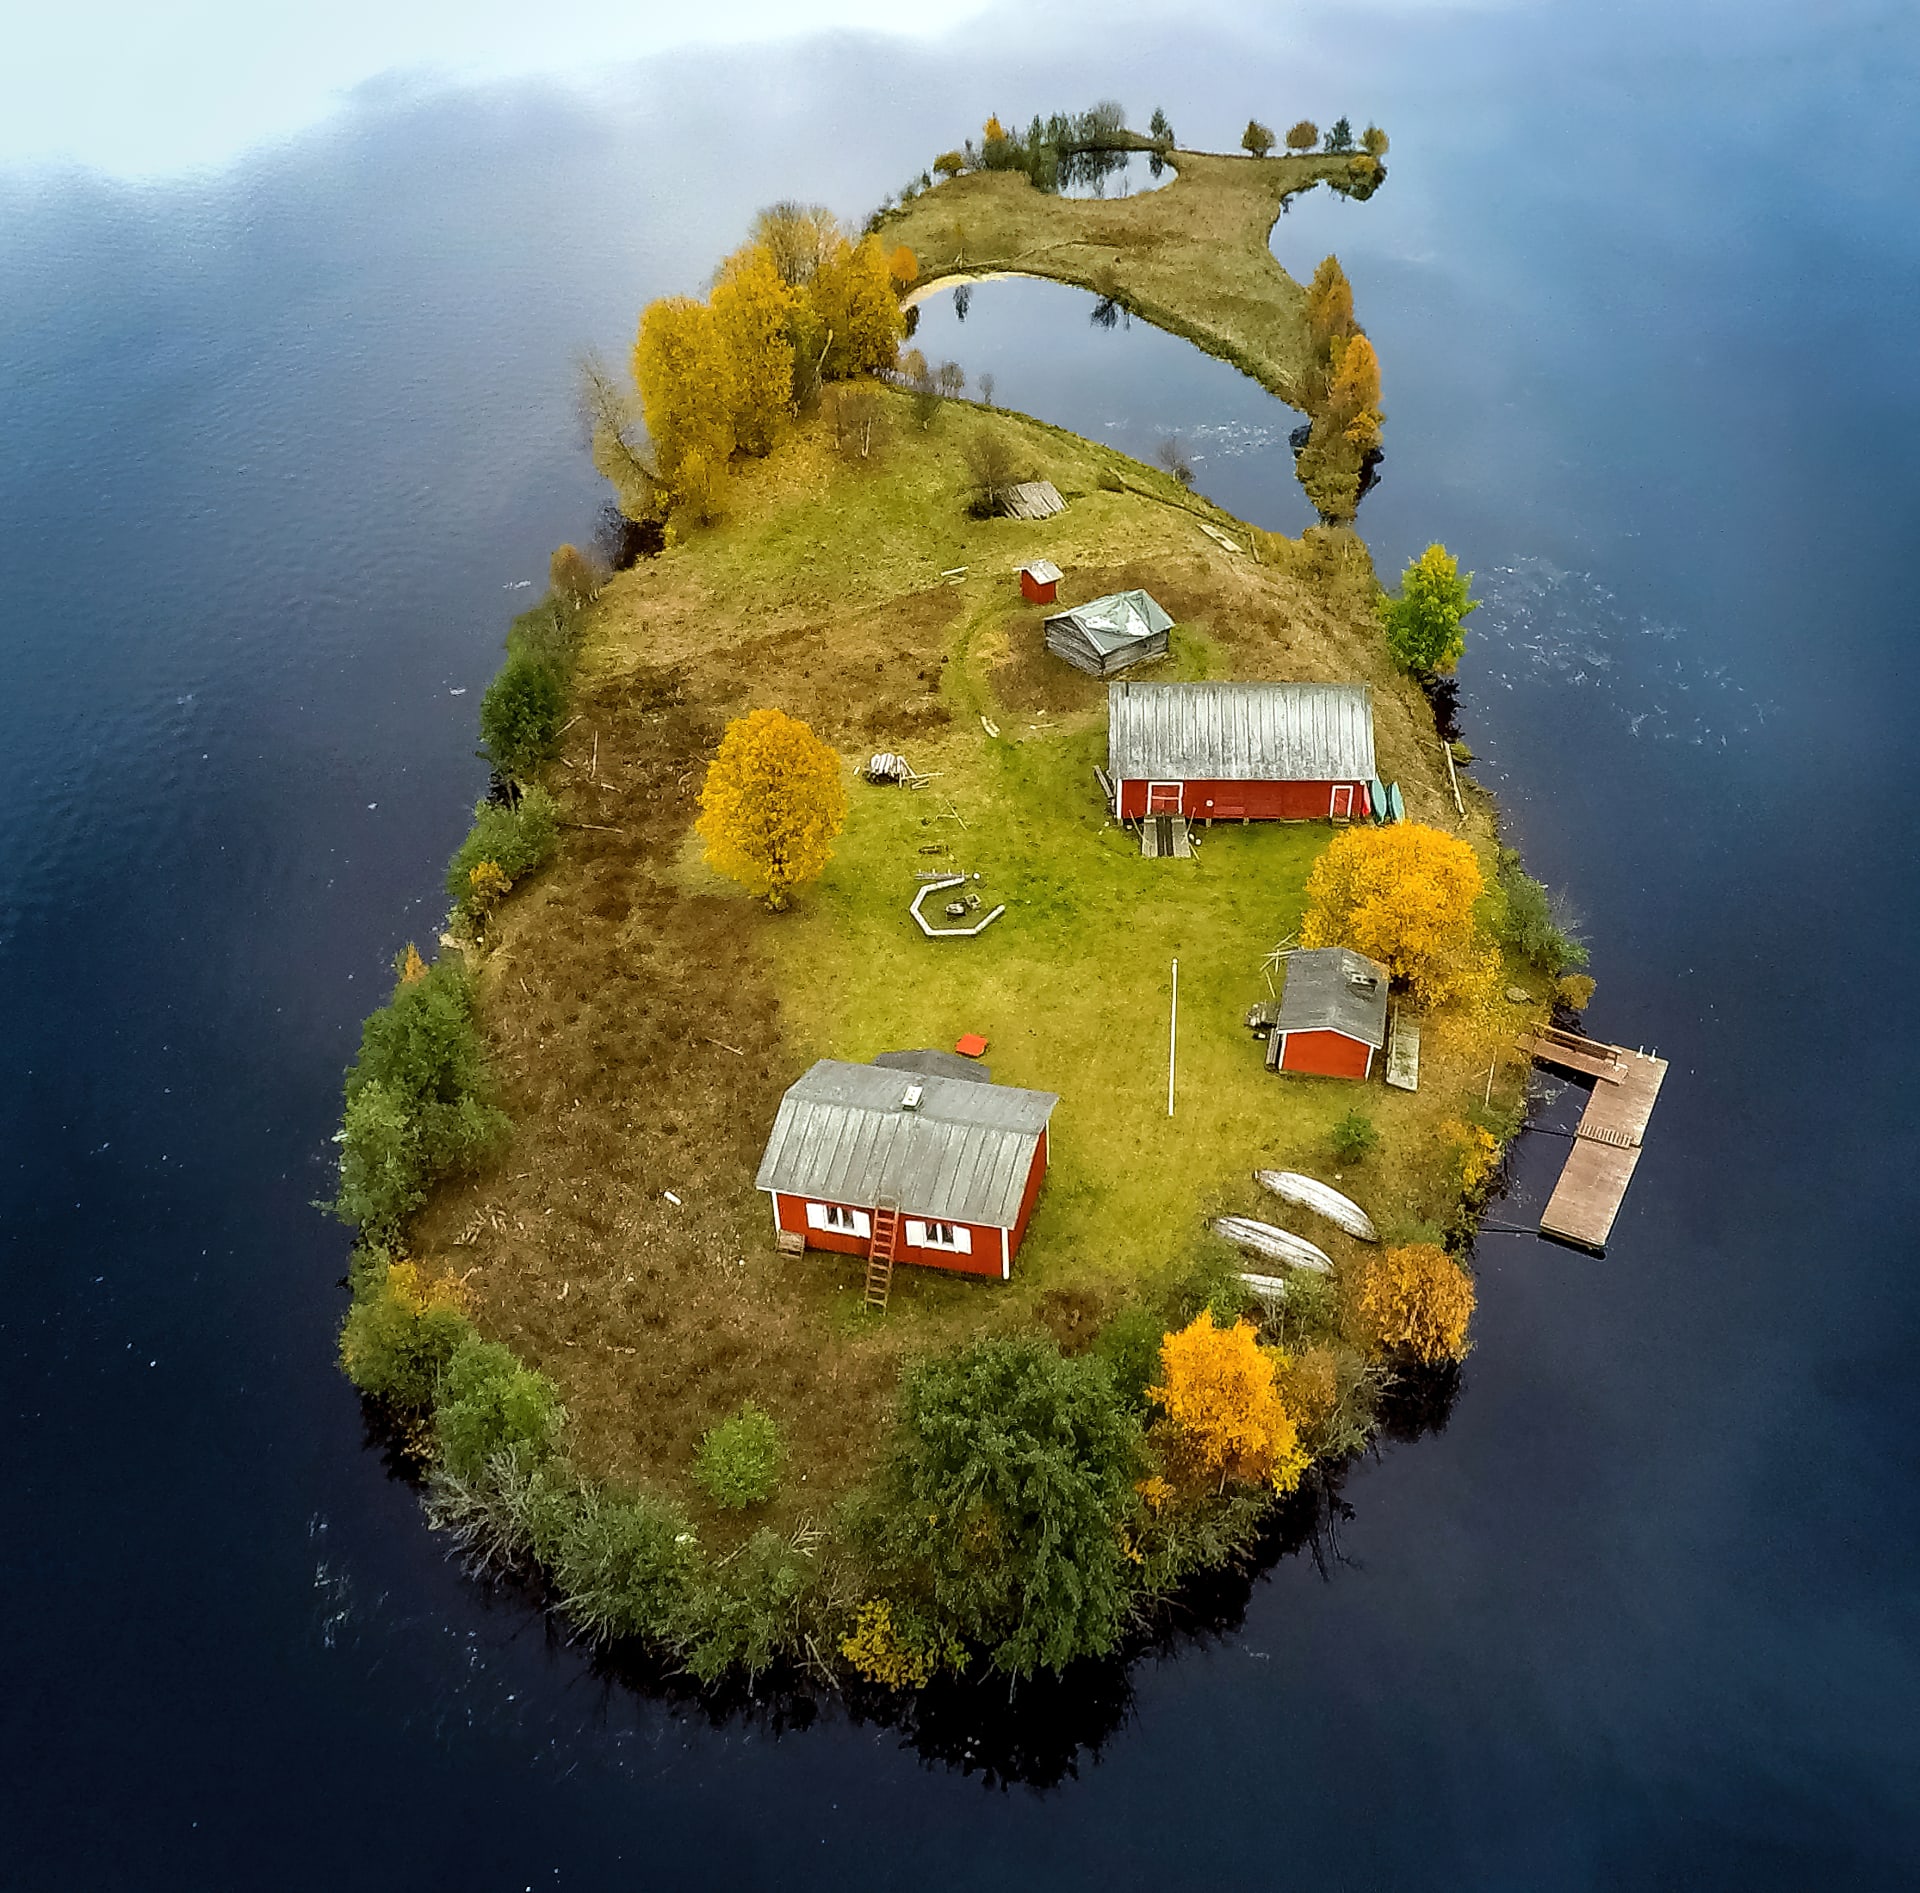 This is how the four seasons change on this small island in Finland